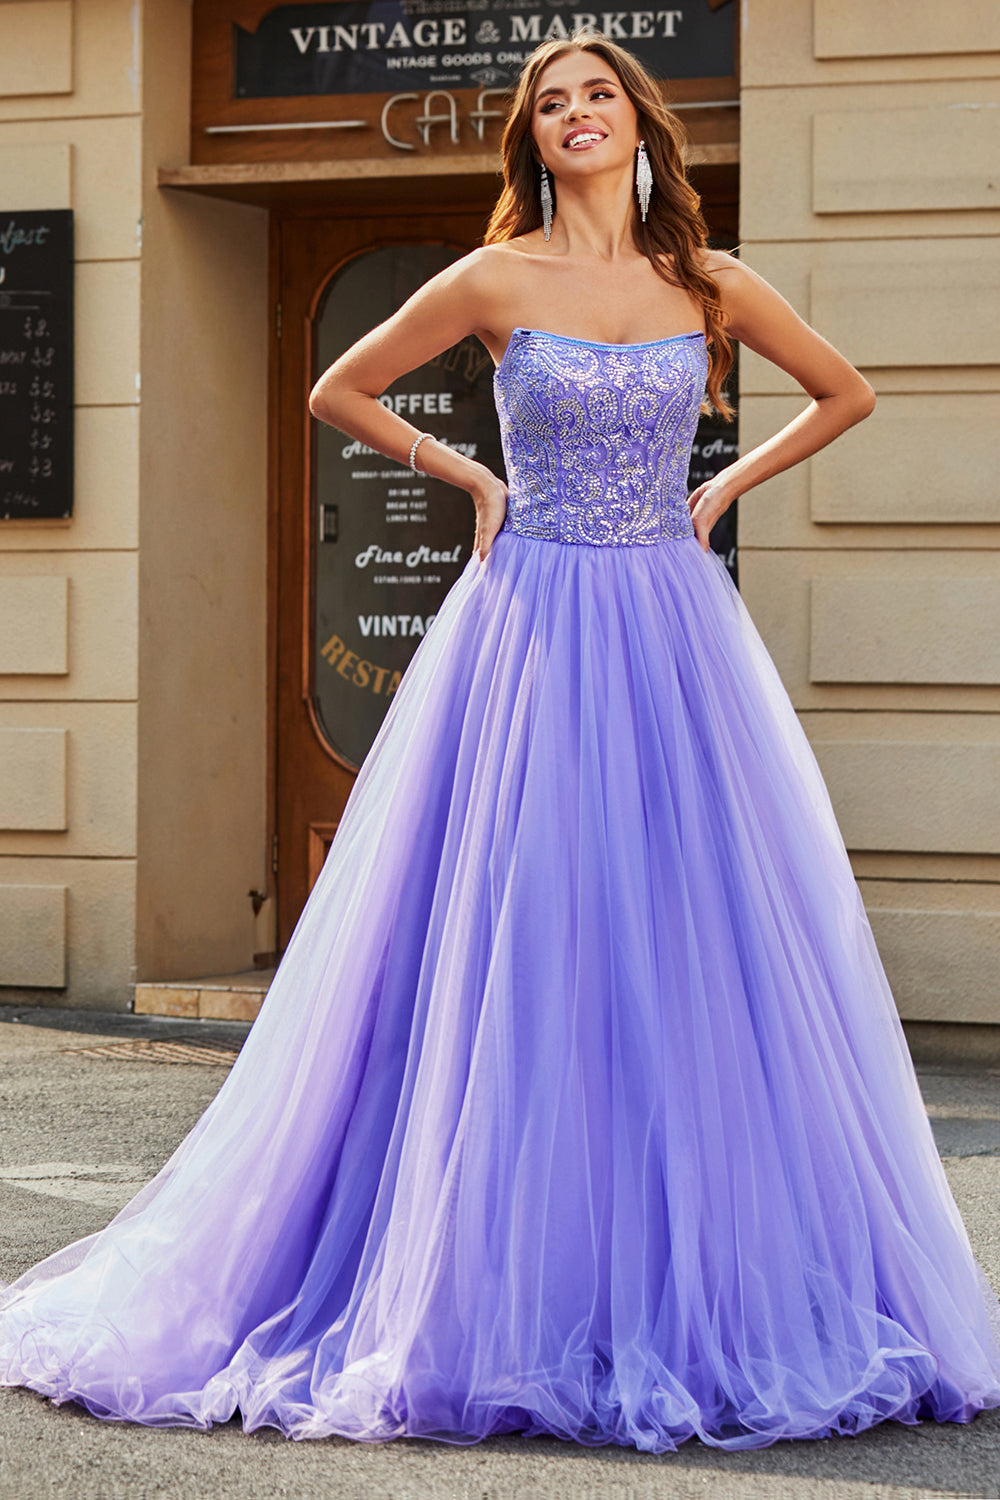 Fashion Purple Ball Gown Prom Dresses 2019 Off Shoulder Sleeves Sexy Floor  Length Lace Up Corset Plus Size Formal Evening Party Gowns Wear From  Babydress001, $45.74 | DHgate.Com